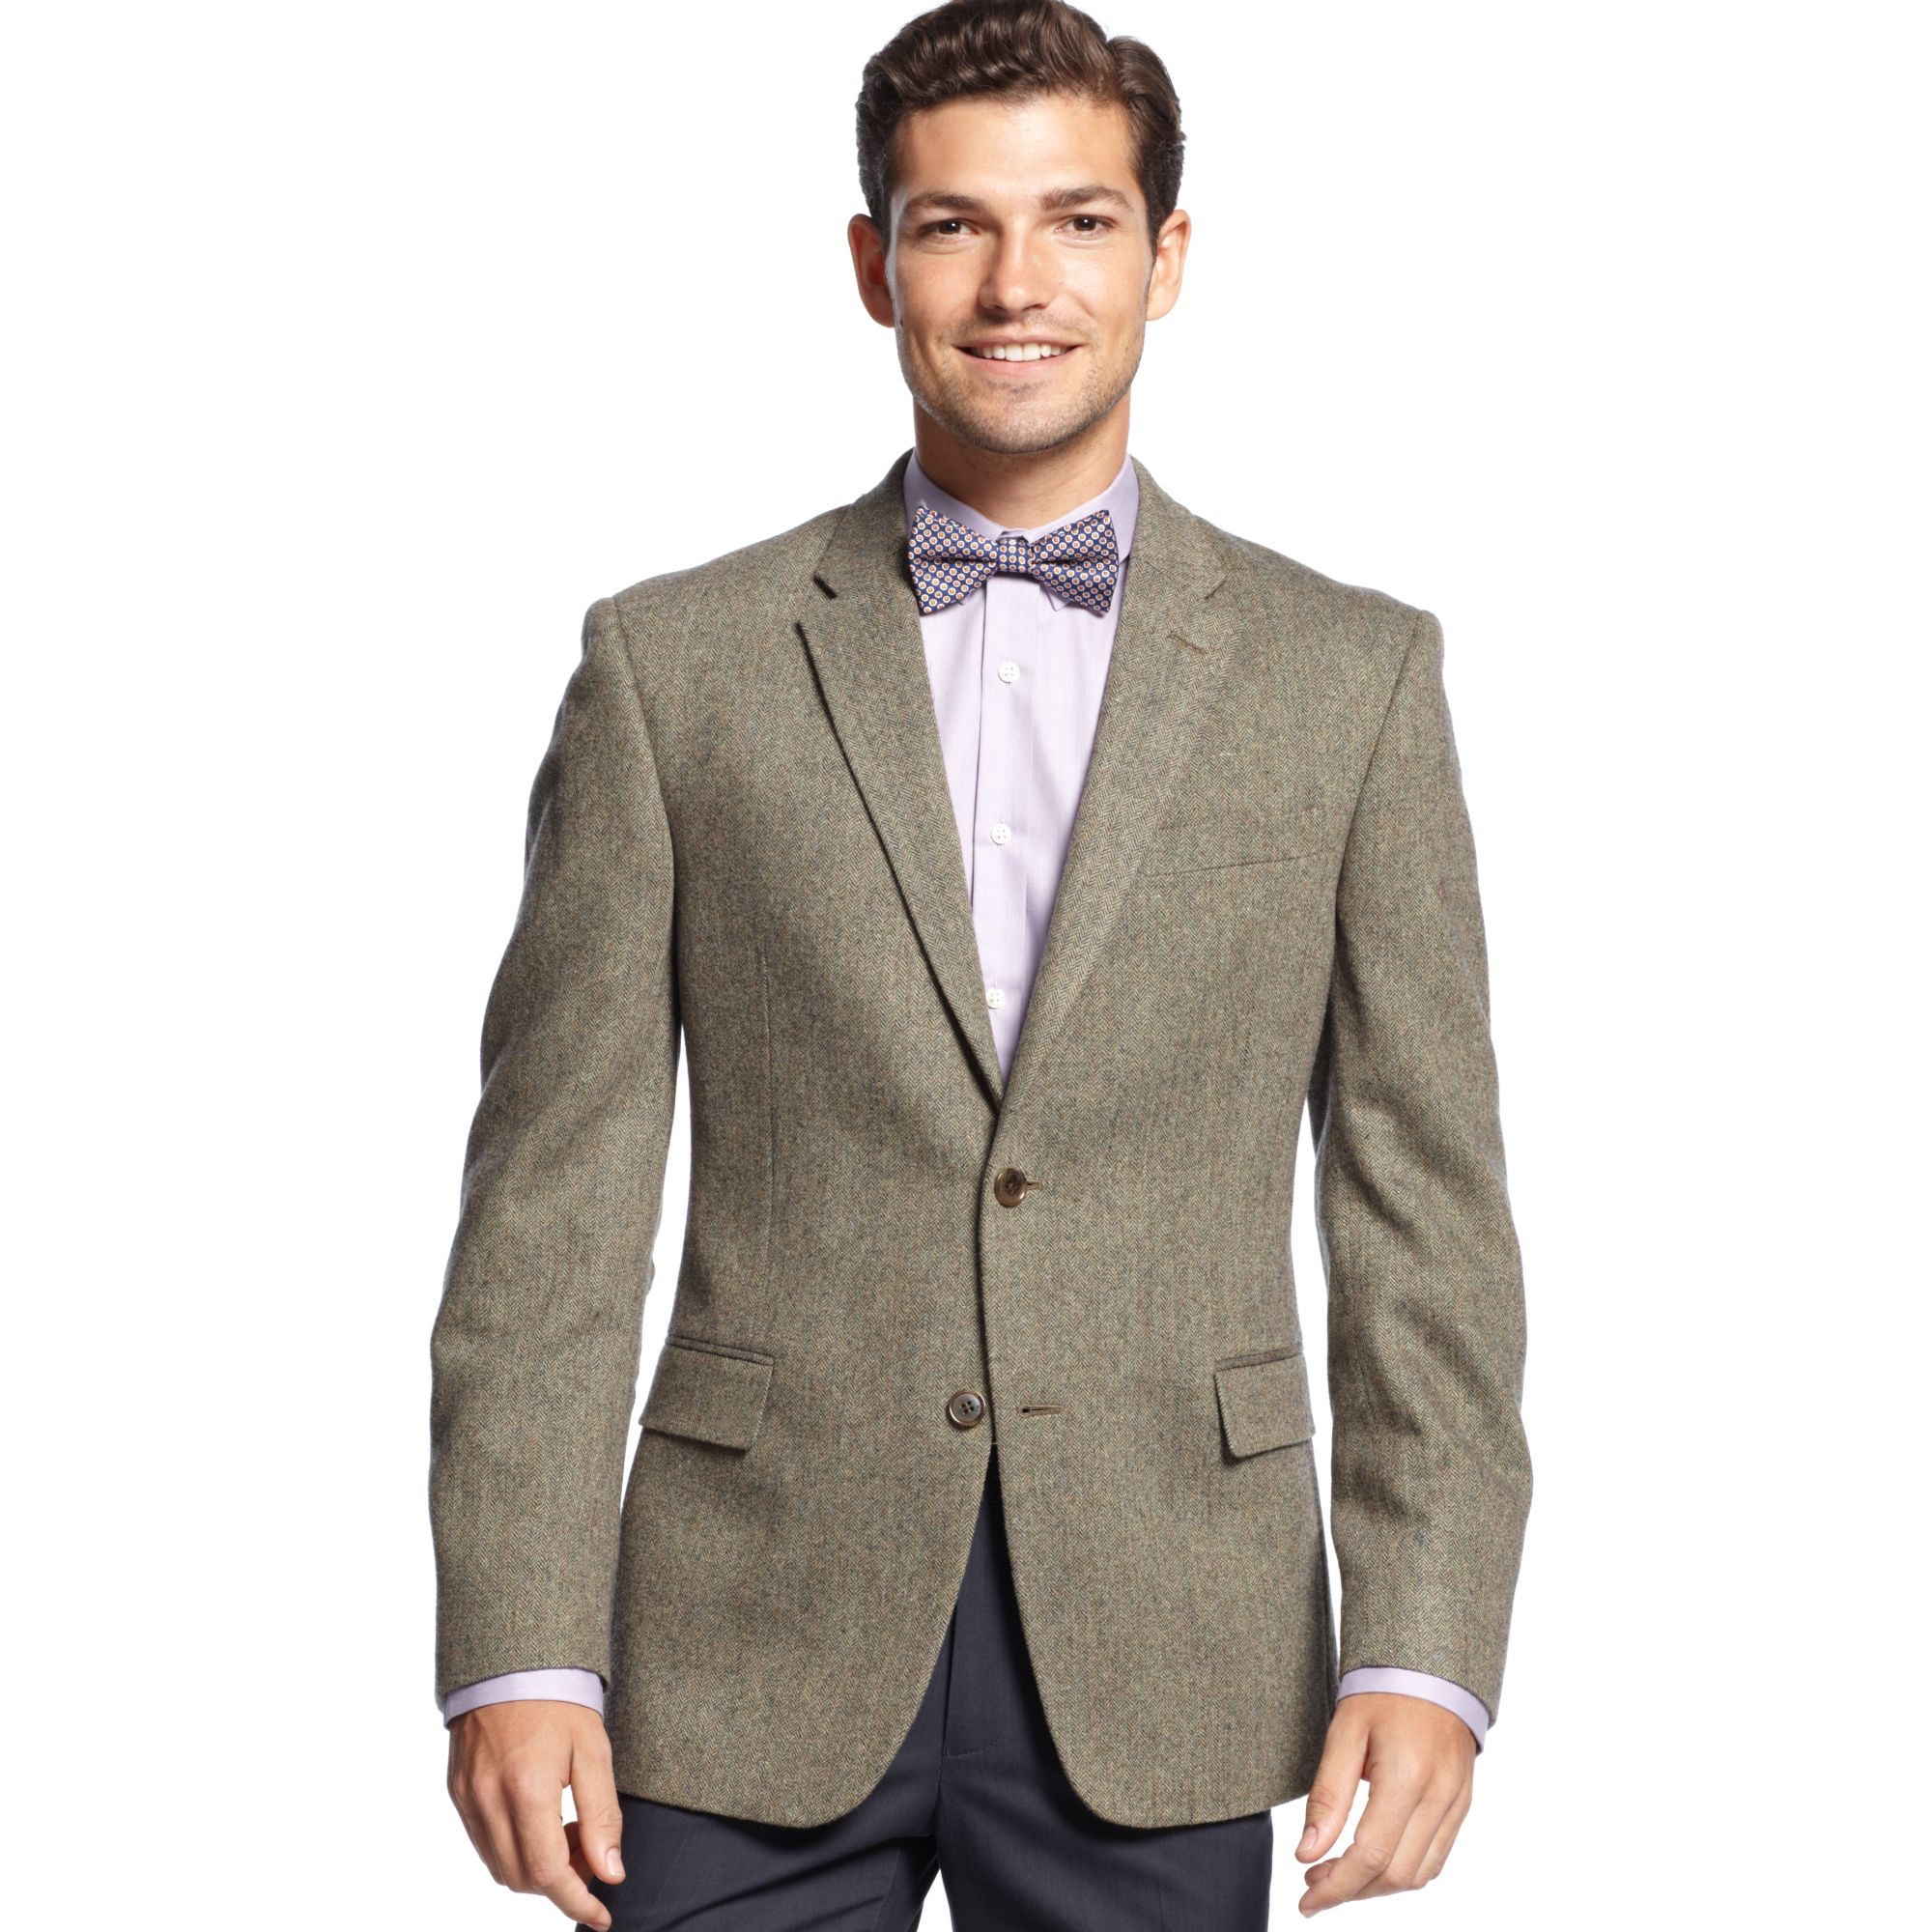 Lyst - Tommy Hilfiger Herringbone Sportcoat with Elbow Patches in Brown ...